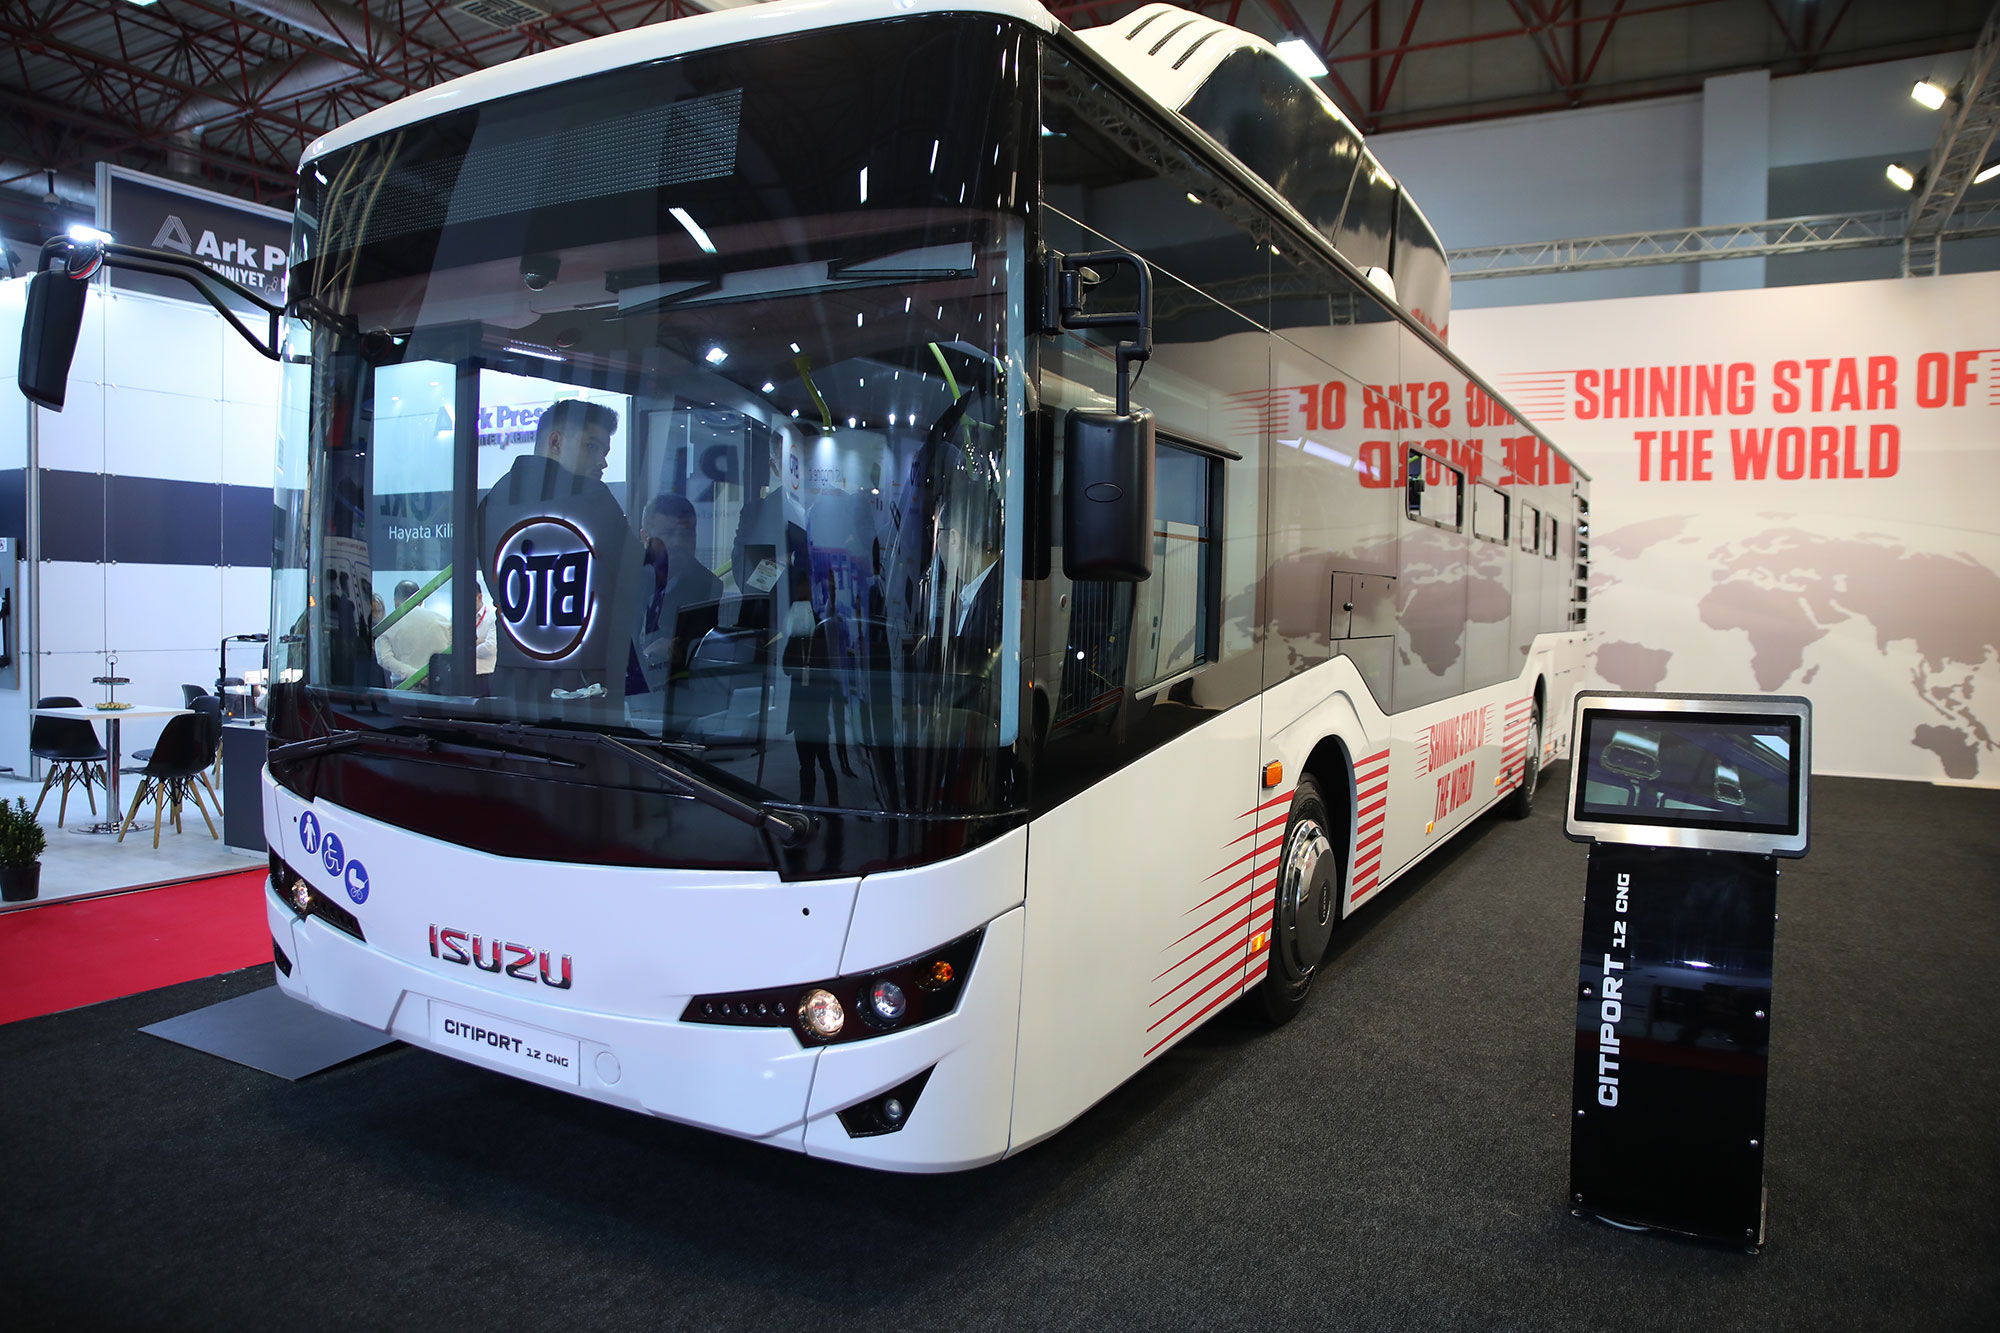 citiport_12_cng.jpg